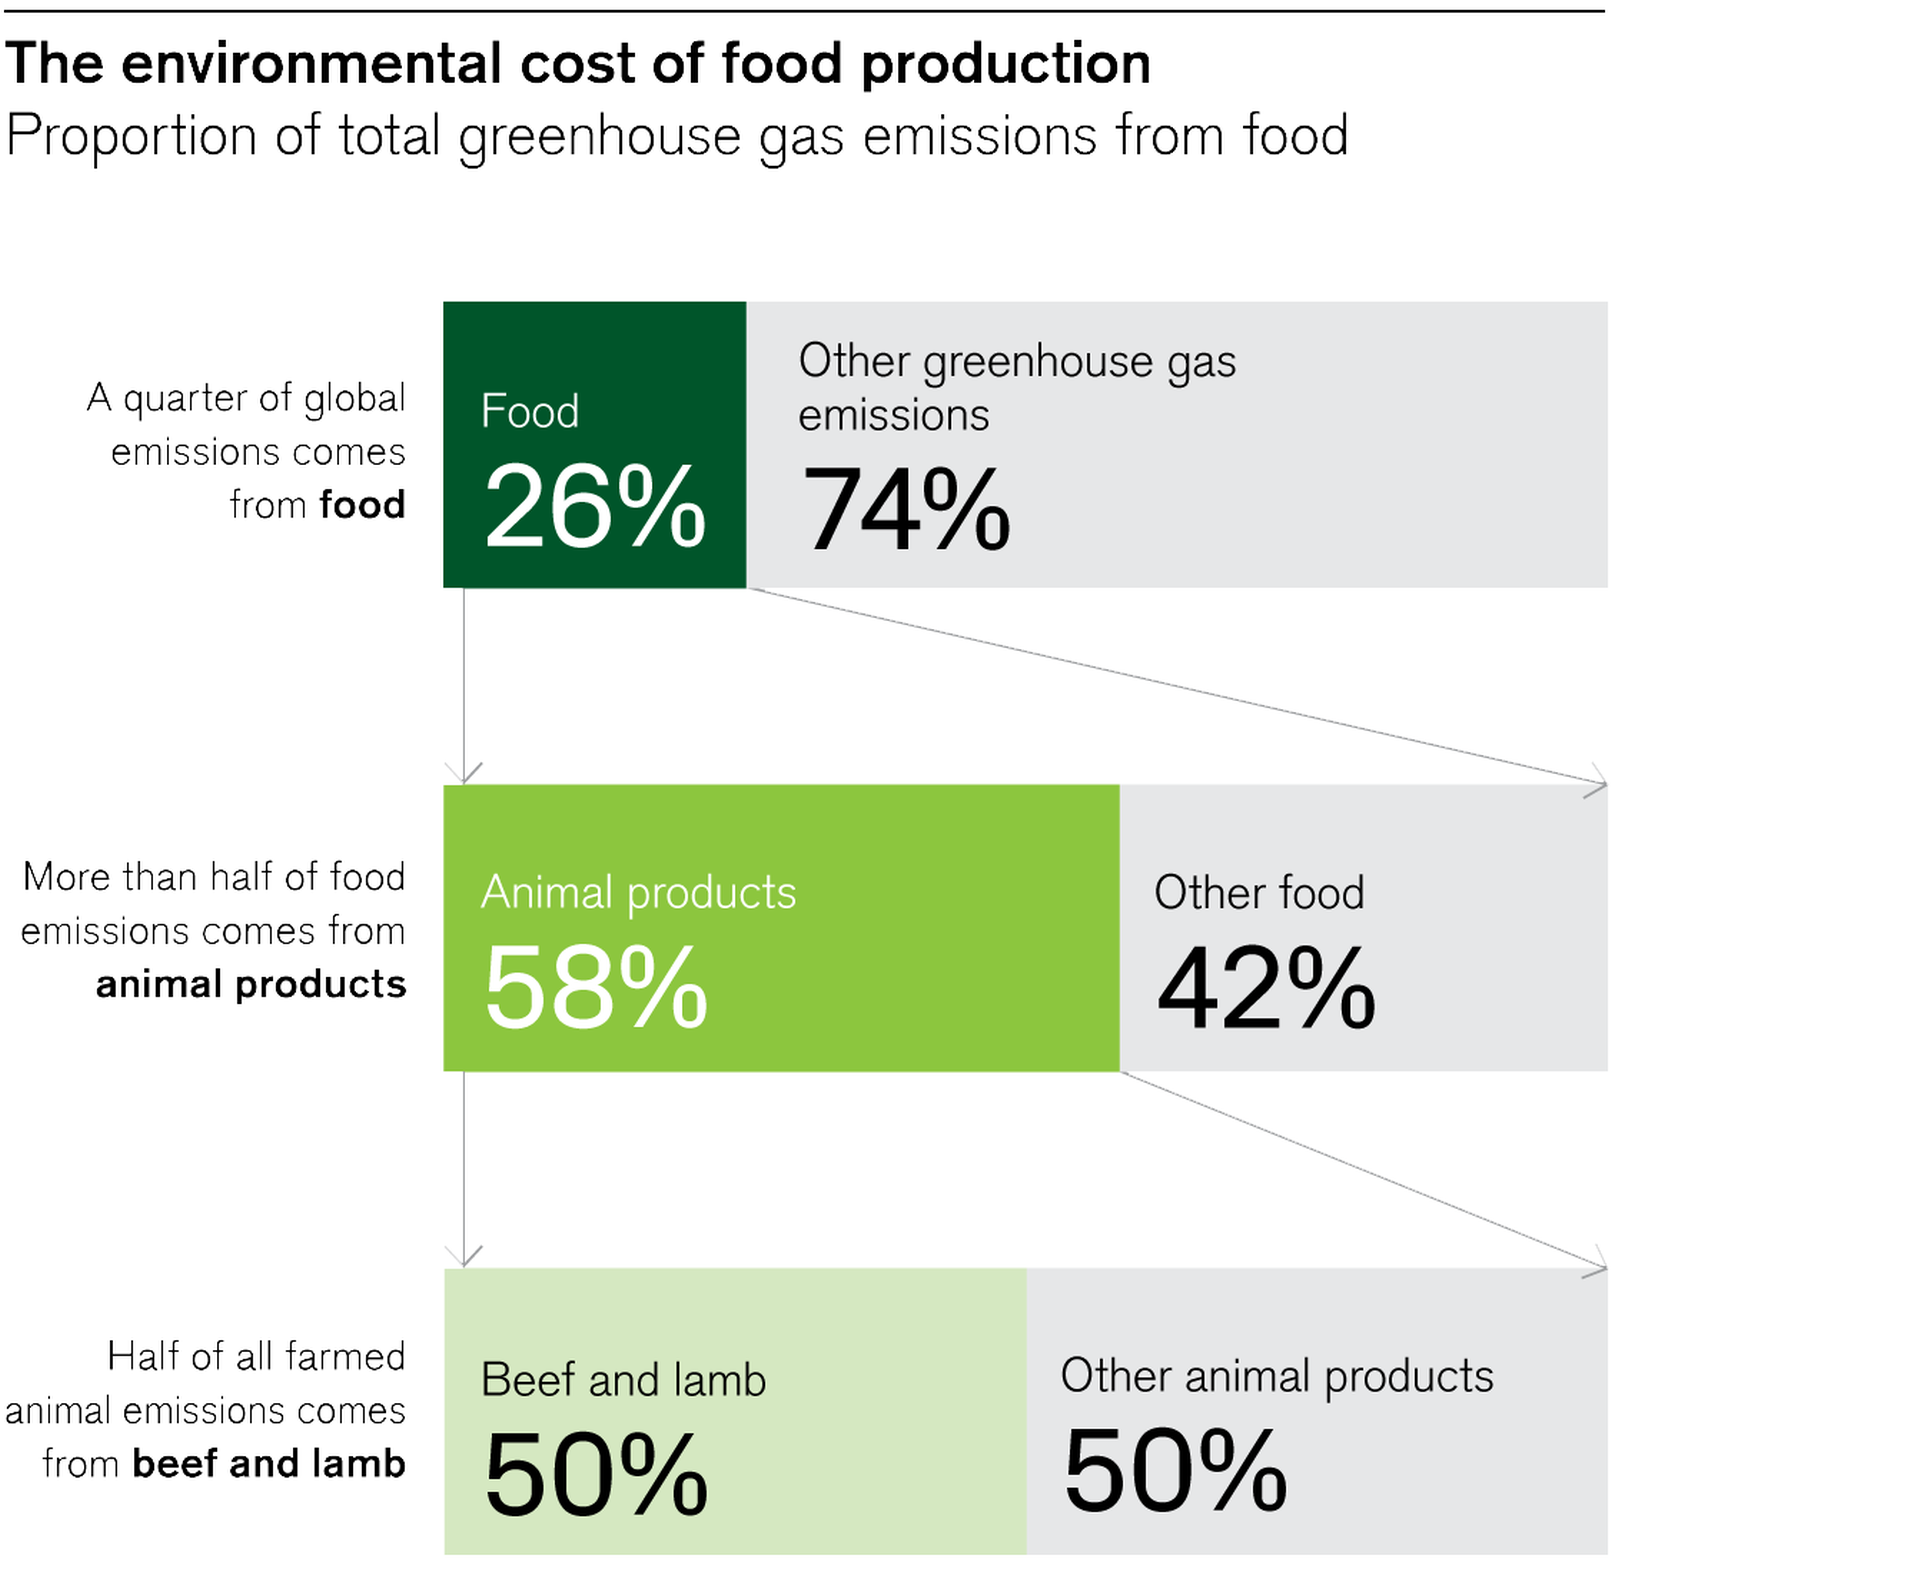 Proportion of total greenhouse gas emissions from food